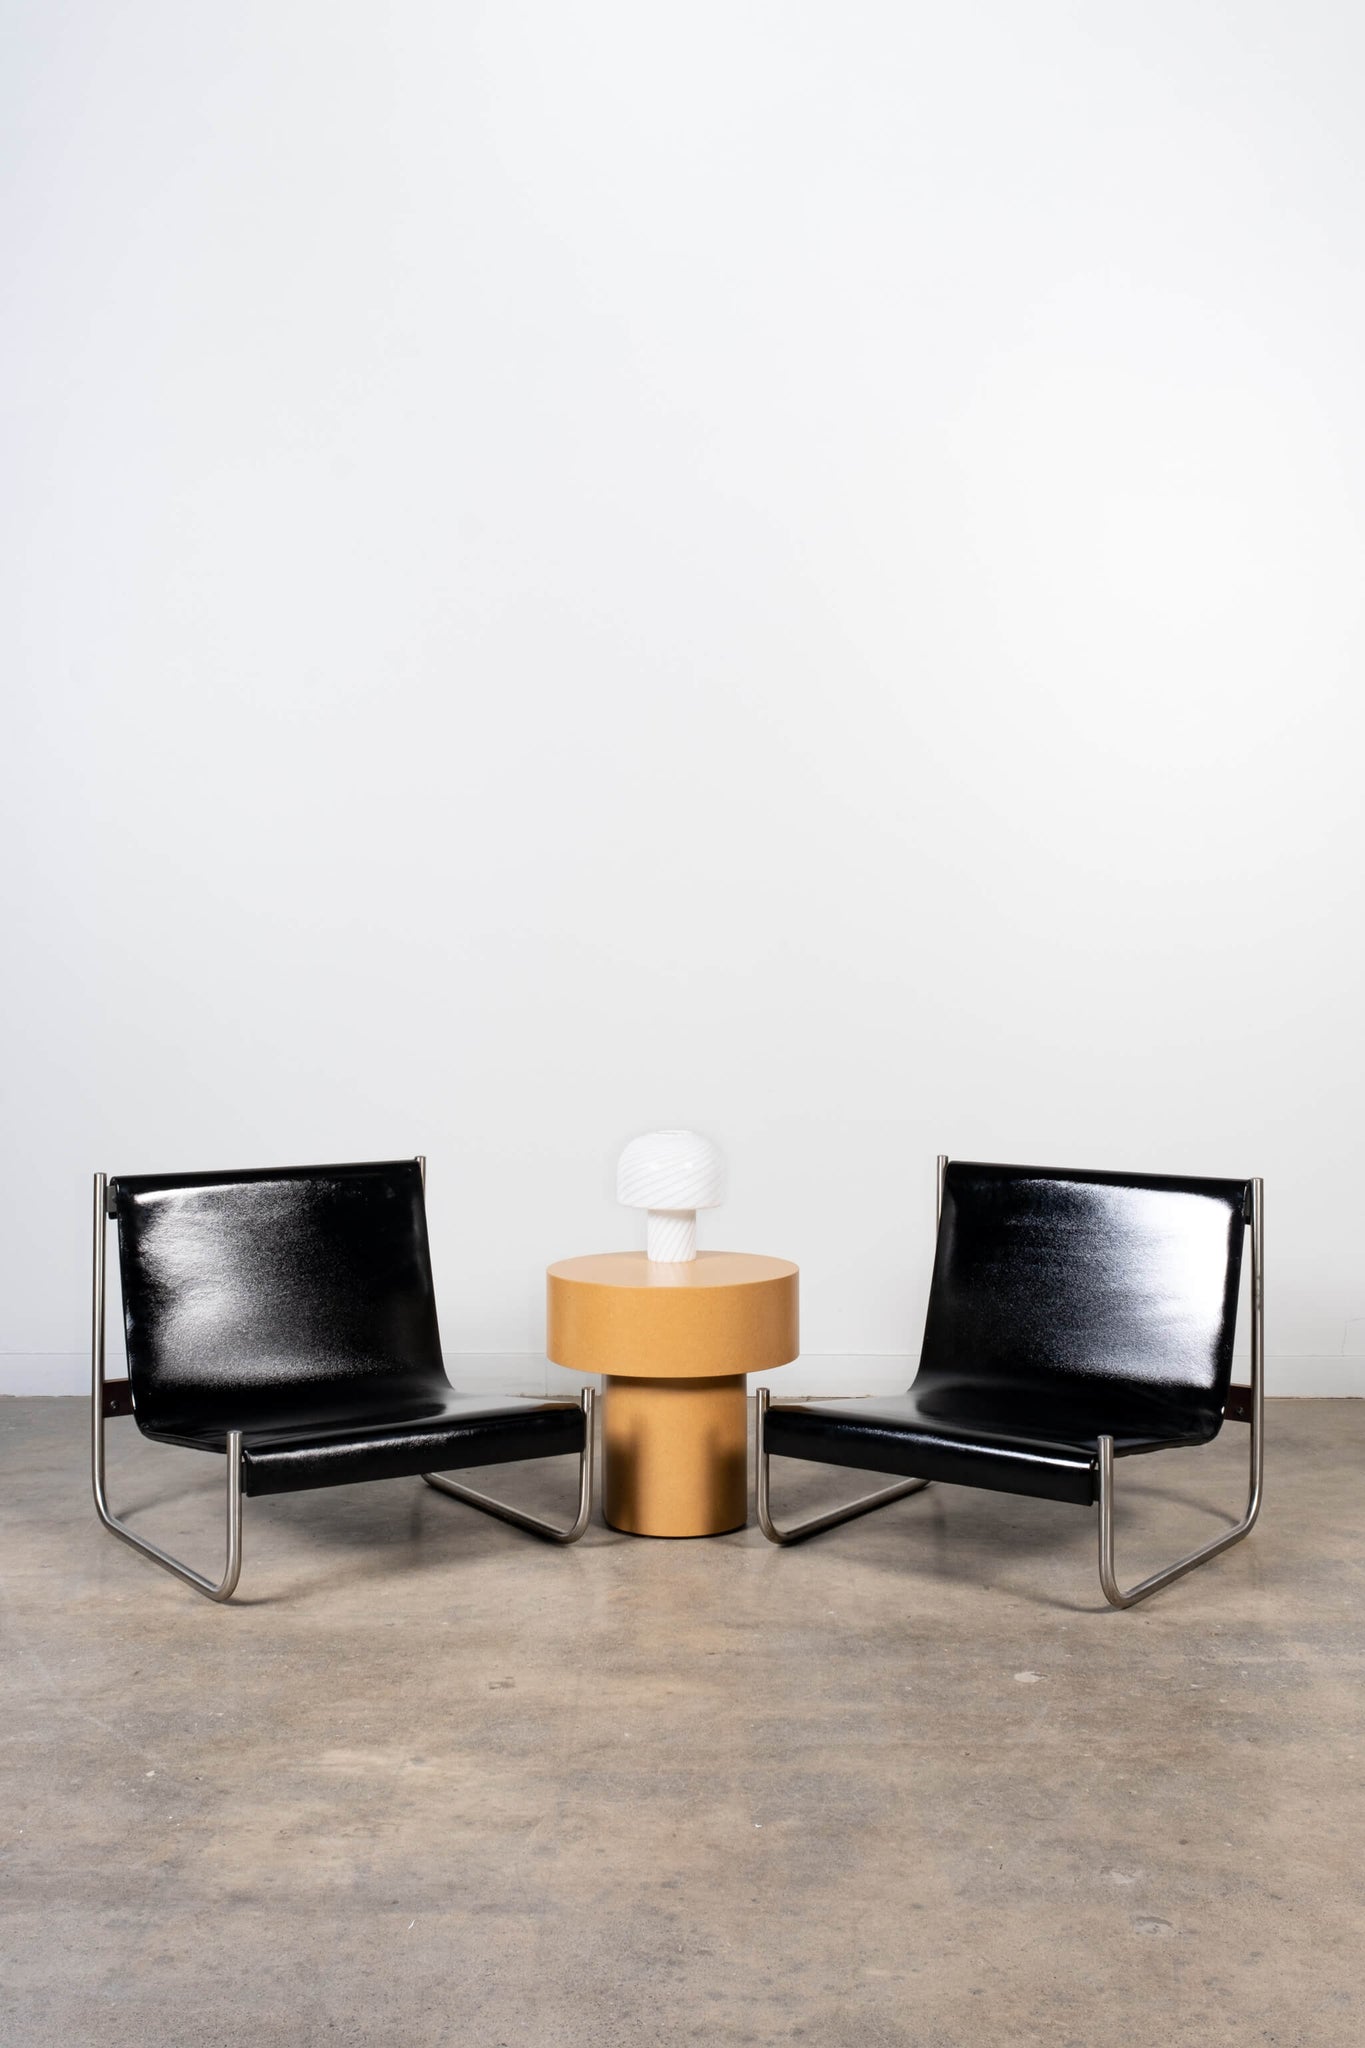 Pair of Vintage Black Patent Leather Chrome Sling Chairs Scuola Di Torino, shown side by side with side table and lamp